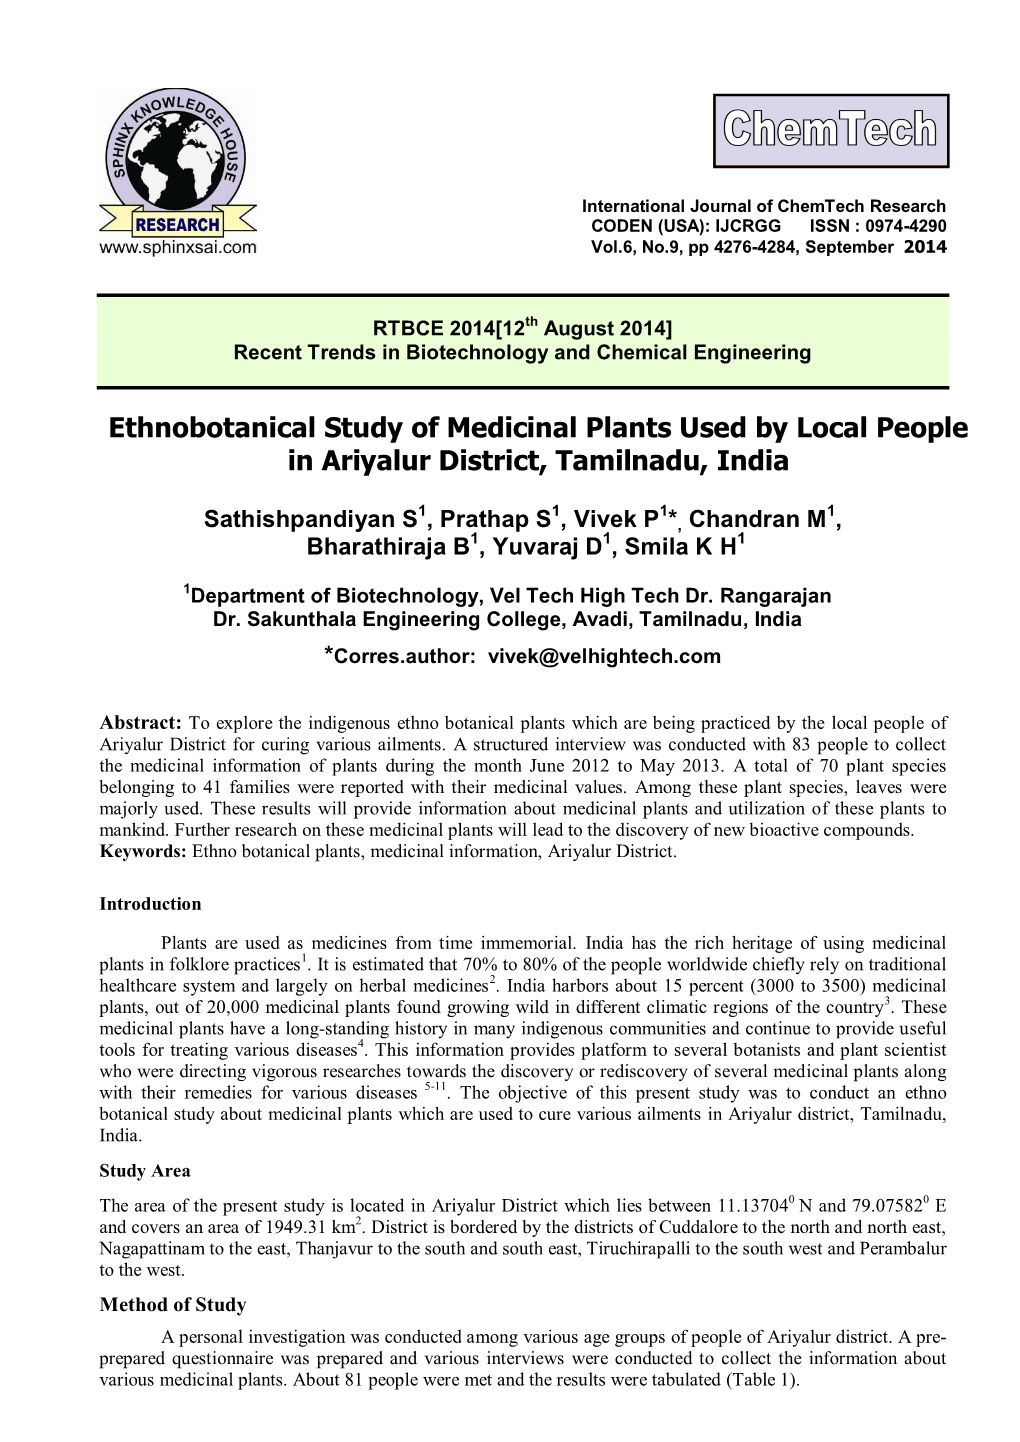 Ethnobotanical Study of Medicinal Plants Used by Local People in Ariyalur District, Tamilnadu, India